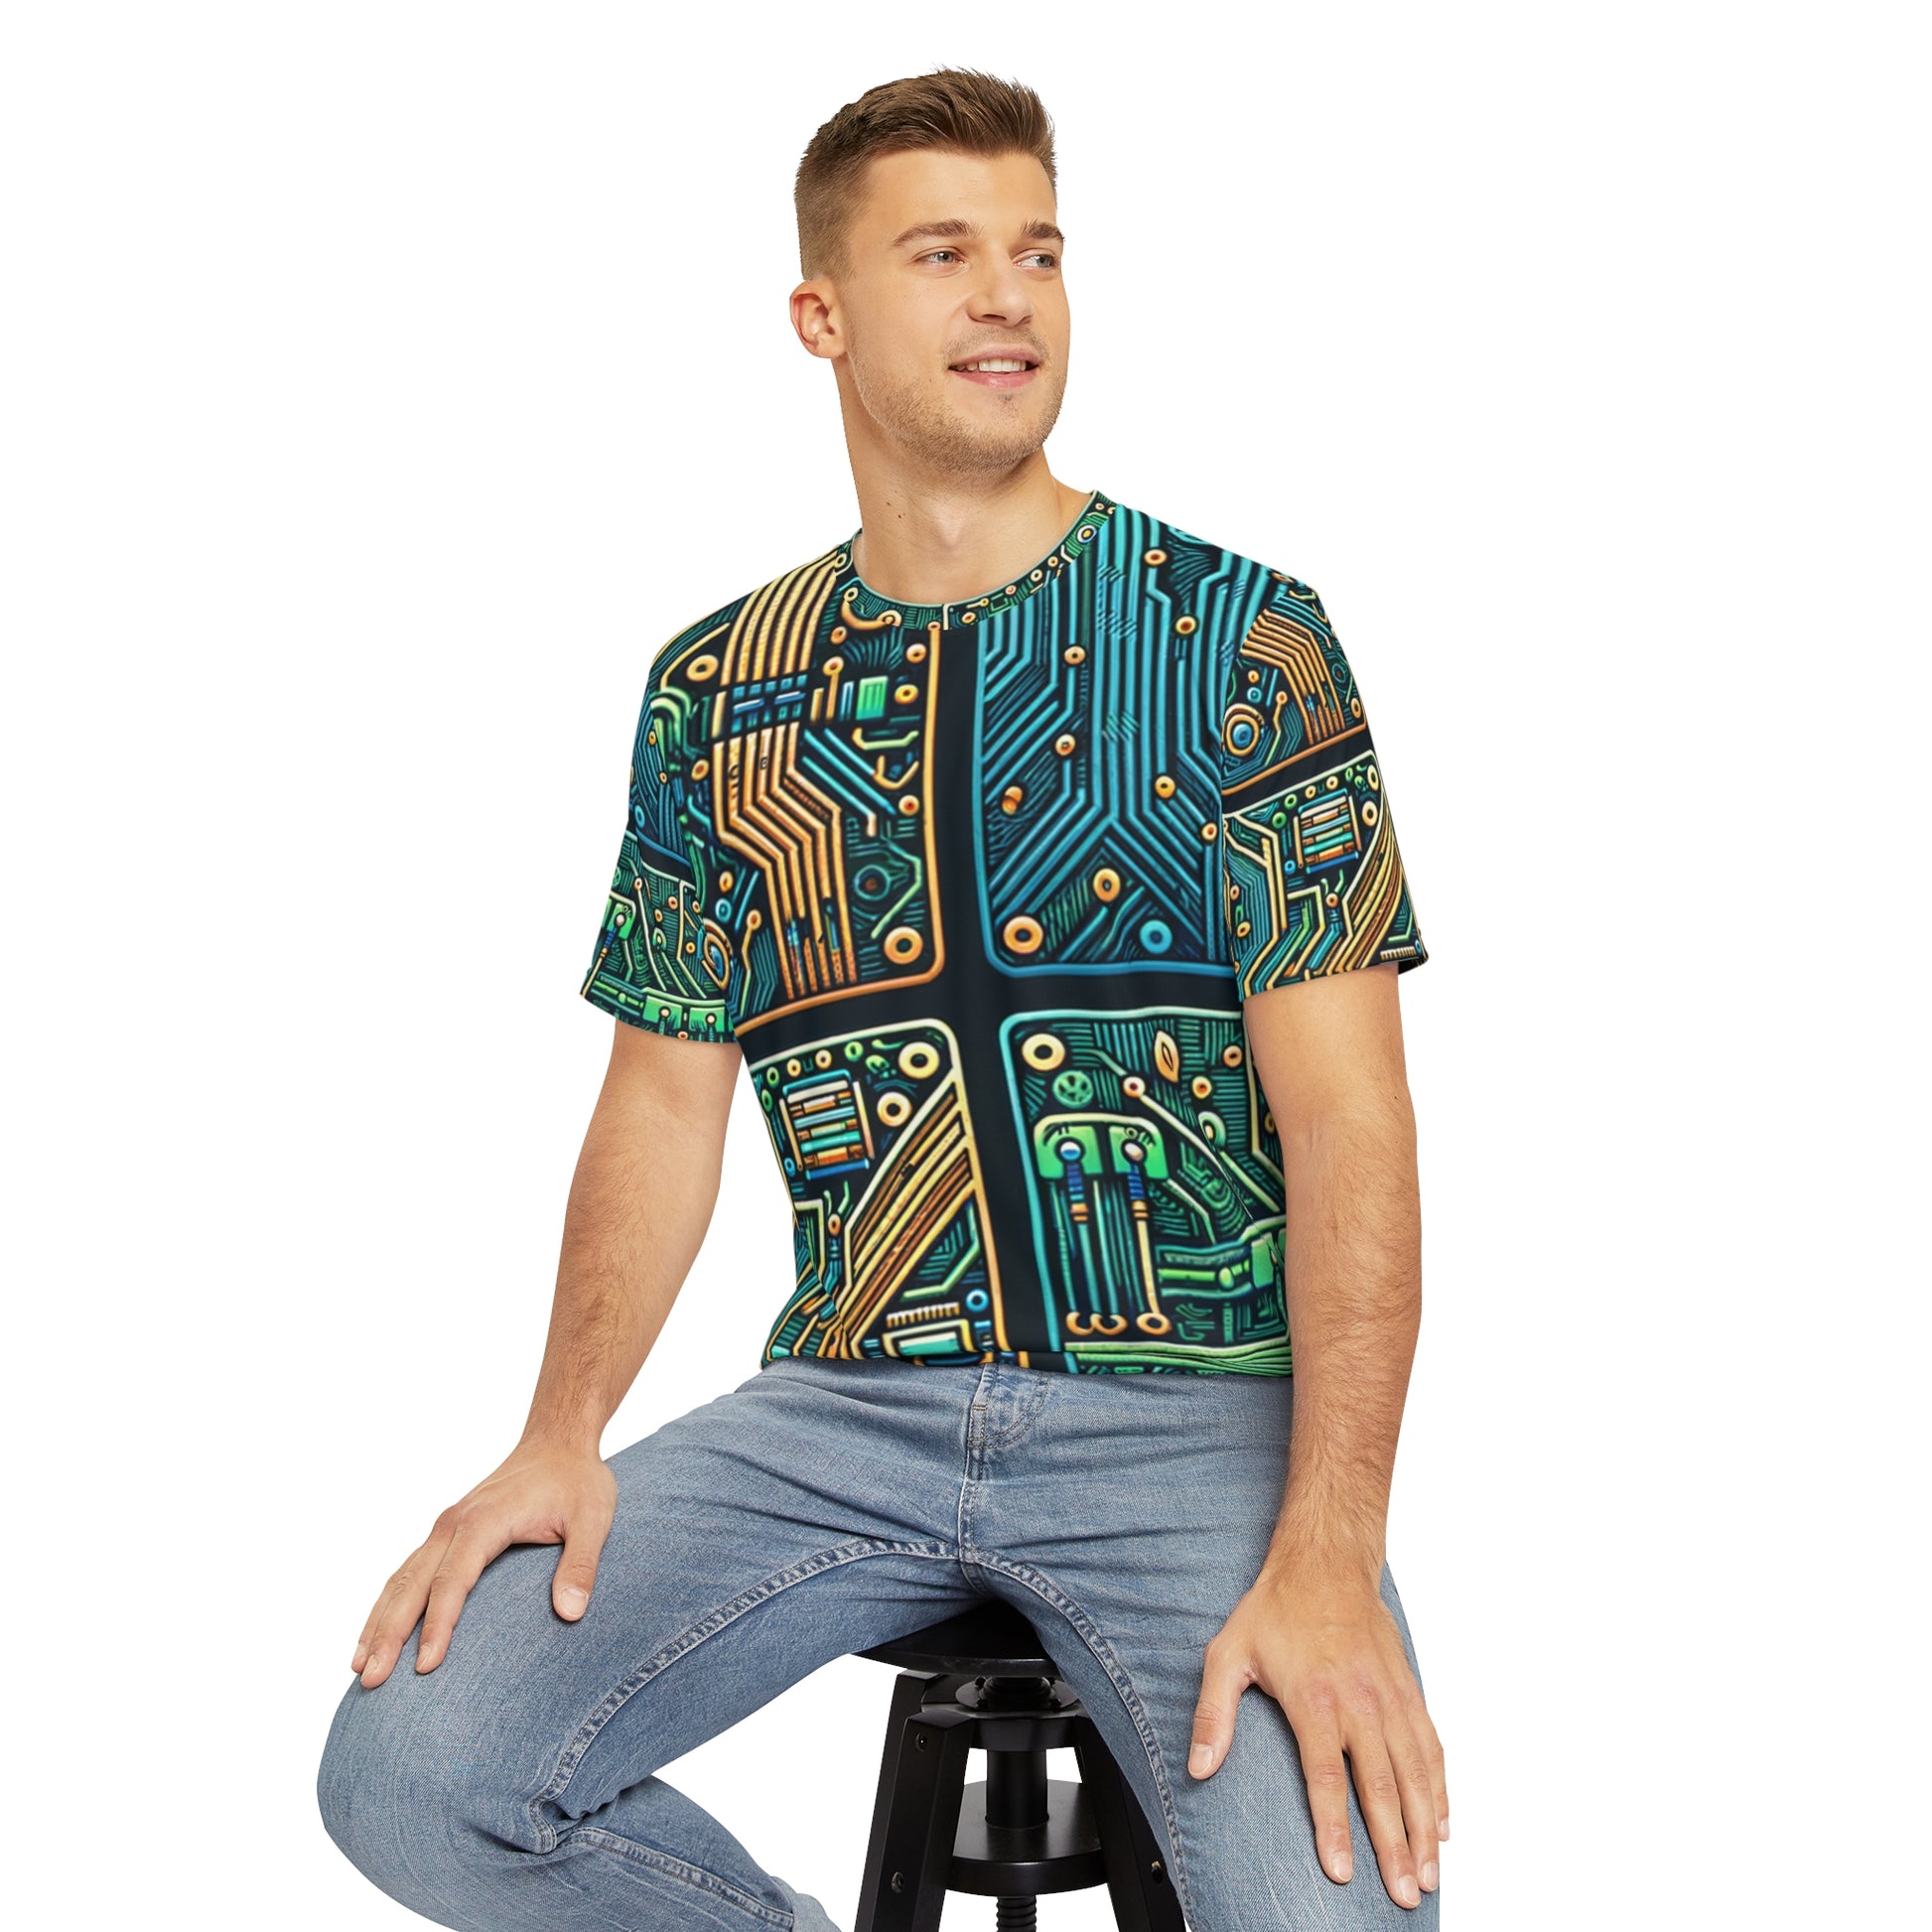 Front view of the Circuit Synapse Array Crewneck Pullover All-Over Print Short-Sleeved Shirt blue green yellow black white circuit pattern paired with casual denim pants worn by a white man sitting on a stool chair